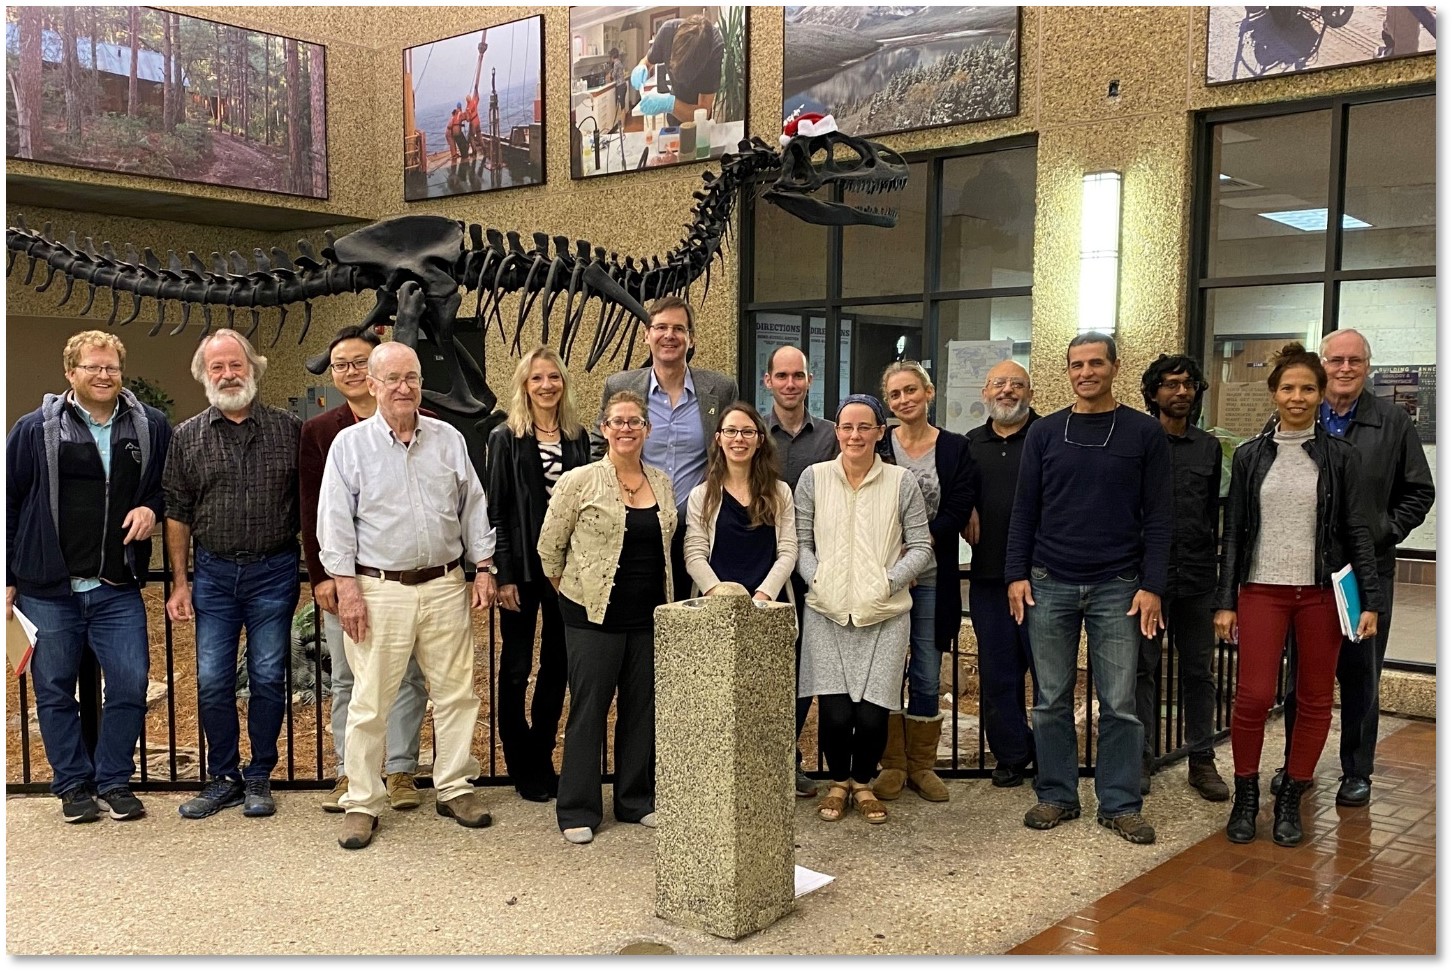 Figure 9. Partial group of active and emeritus faculty in the Department of Geology and Geophysics (2019). From left to right – Achim Herrmann, Darrell Henry, Guangsheng Zhuang, Jeff Hanor, Barb Dutrow, Carol Wilson, Jon Snow, Dominique Garello, Adam Forte, Karen Luttrell, Sophie Warny, Juan Lorenzo, Phil Bart, Suniti Karunatillake. Patricia Persaud and Brooks Ellwood. Missing faculty: Sam Bentley, Peter Clift, Peter Doran, Amy Luther, Jianwei Wang, and Carol Wicks.